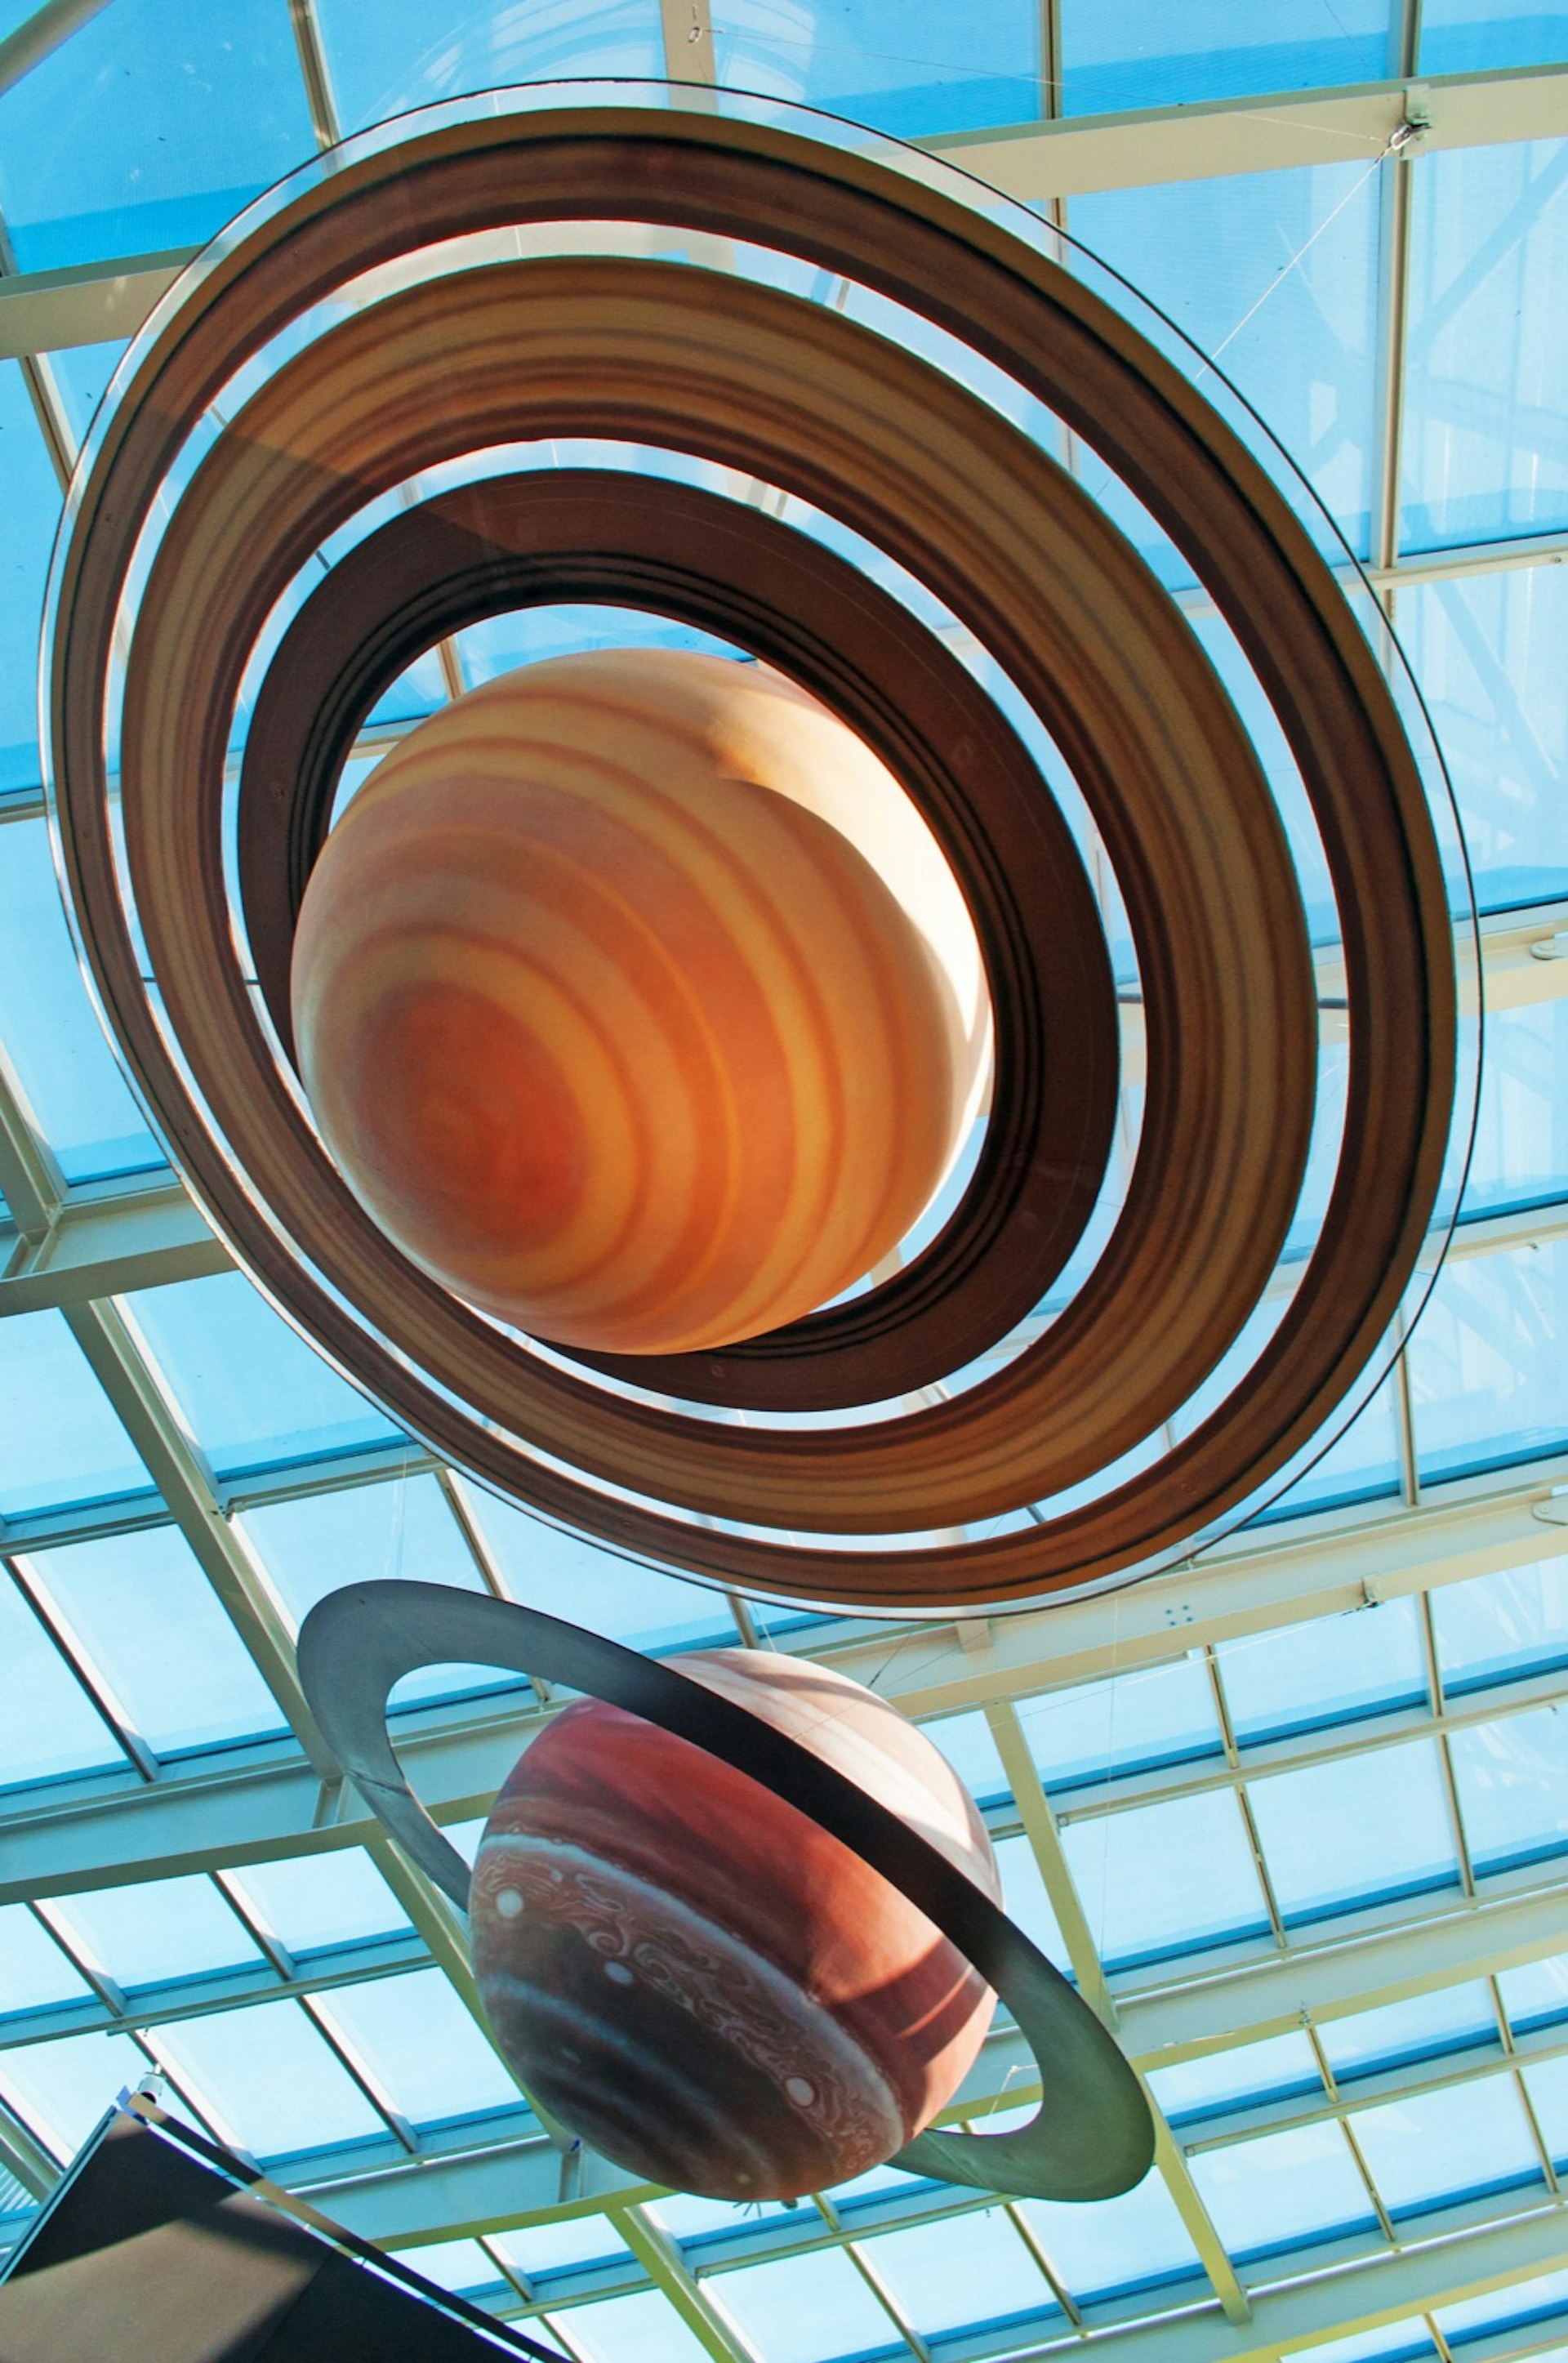 Reconstruction of the solar system at Adler Planetarium. The photos shows two ringed planets, one is orange and yellow with brown rings and the other is red and white with a green ring. The planets are suspended beneath a glass roof through which we can see a clear blue sky; Apollo anniversary experiences